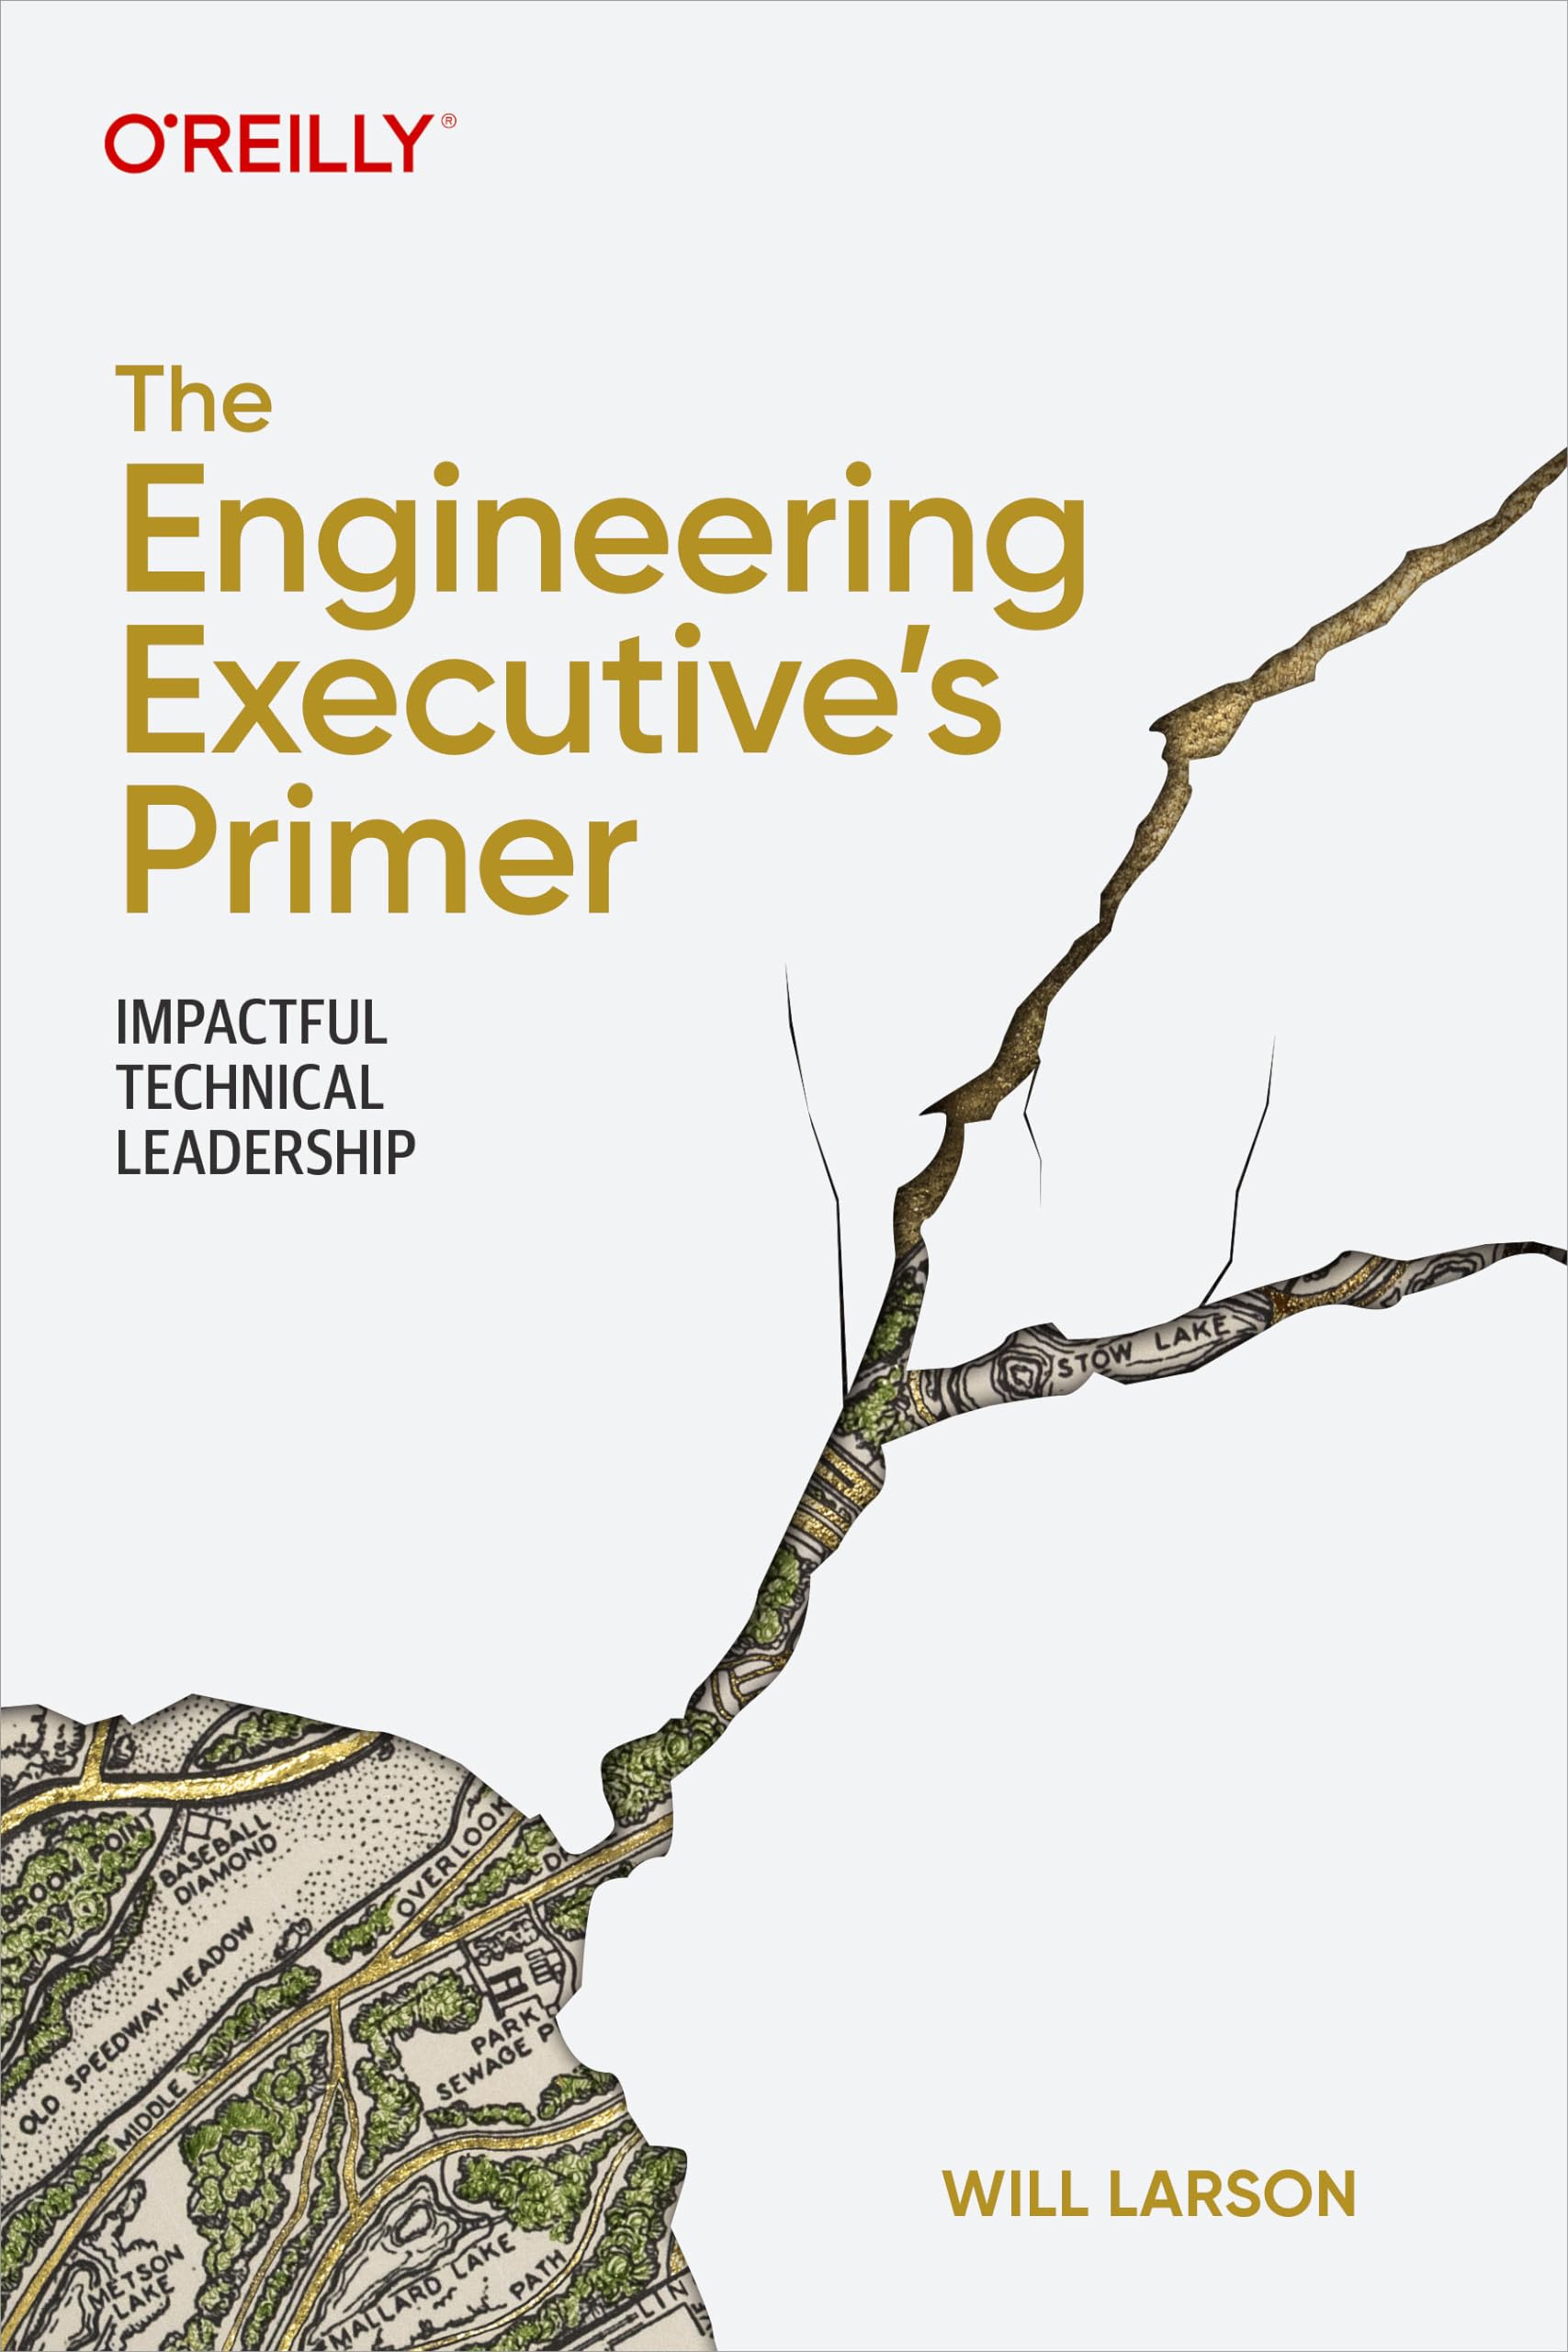 The Engineering Executive’s Primer